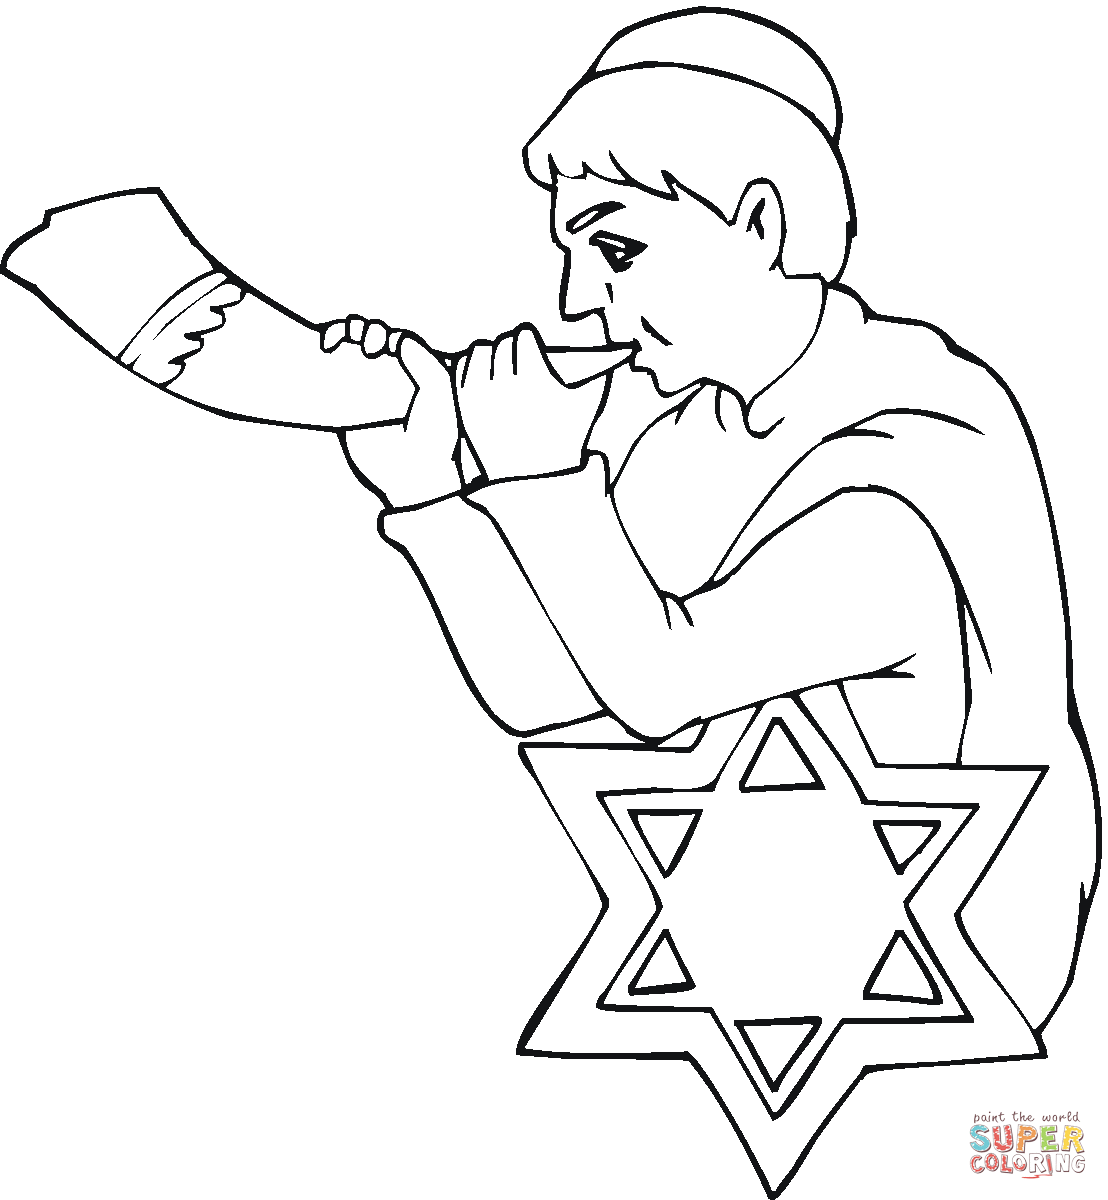 Boy with shofar on rosh hashanah coloring page free printable coloring pages